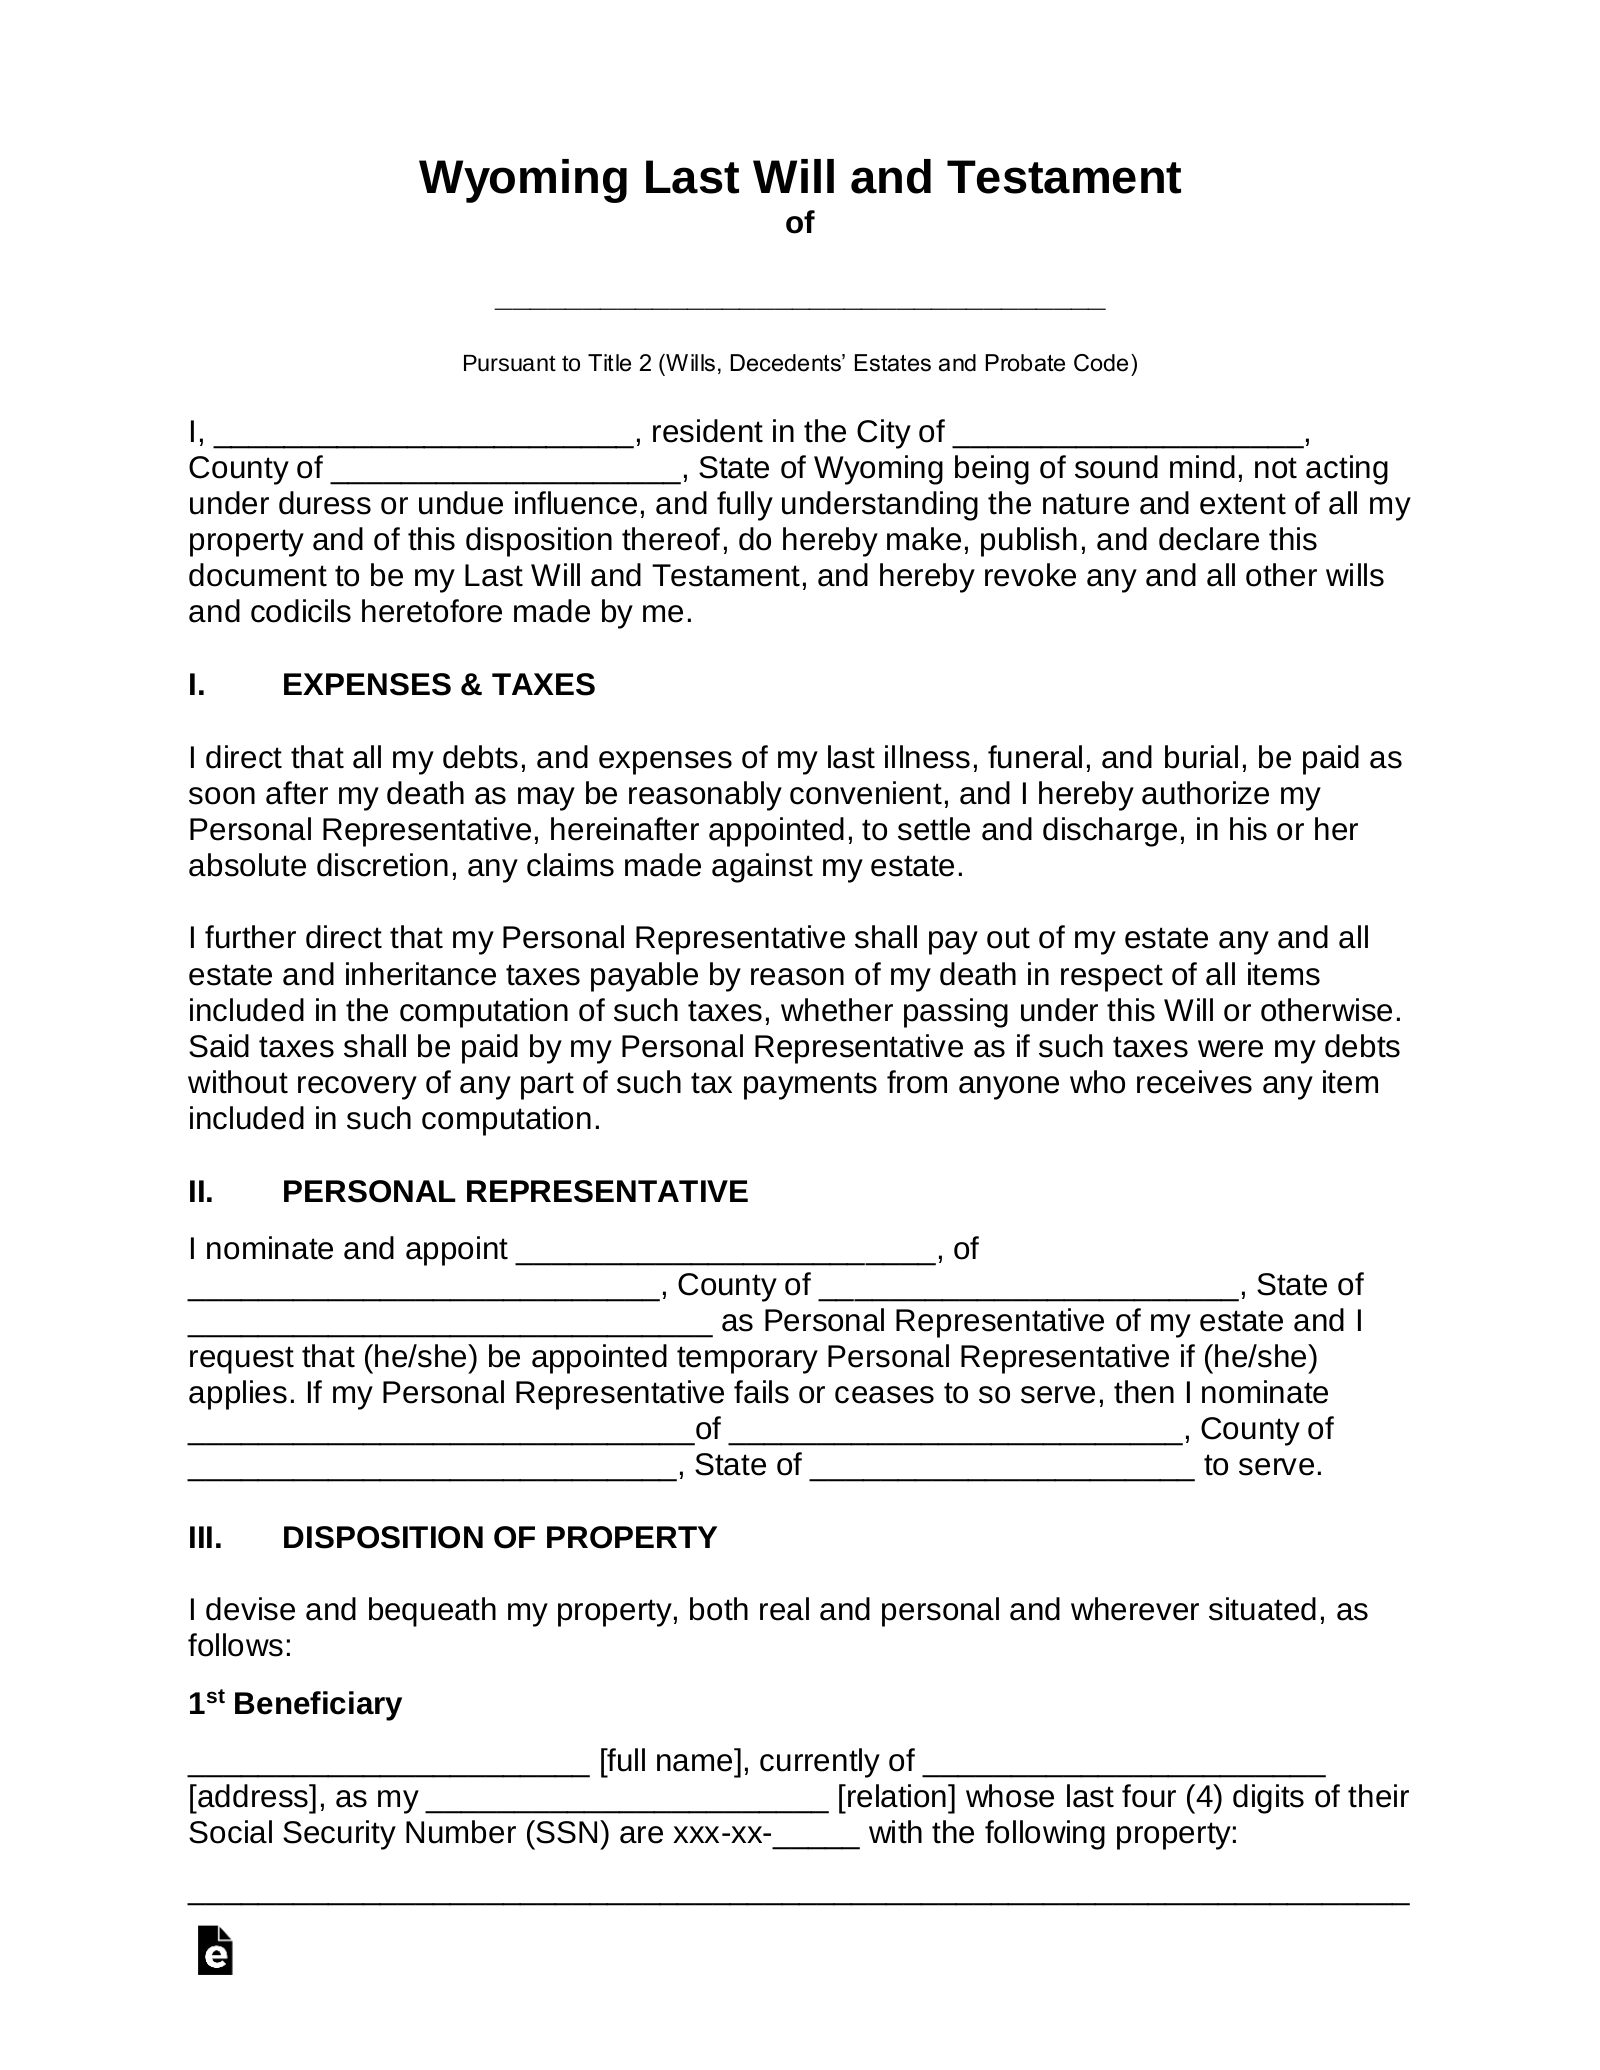 Wyoming Last Will and Testament Template